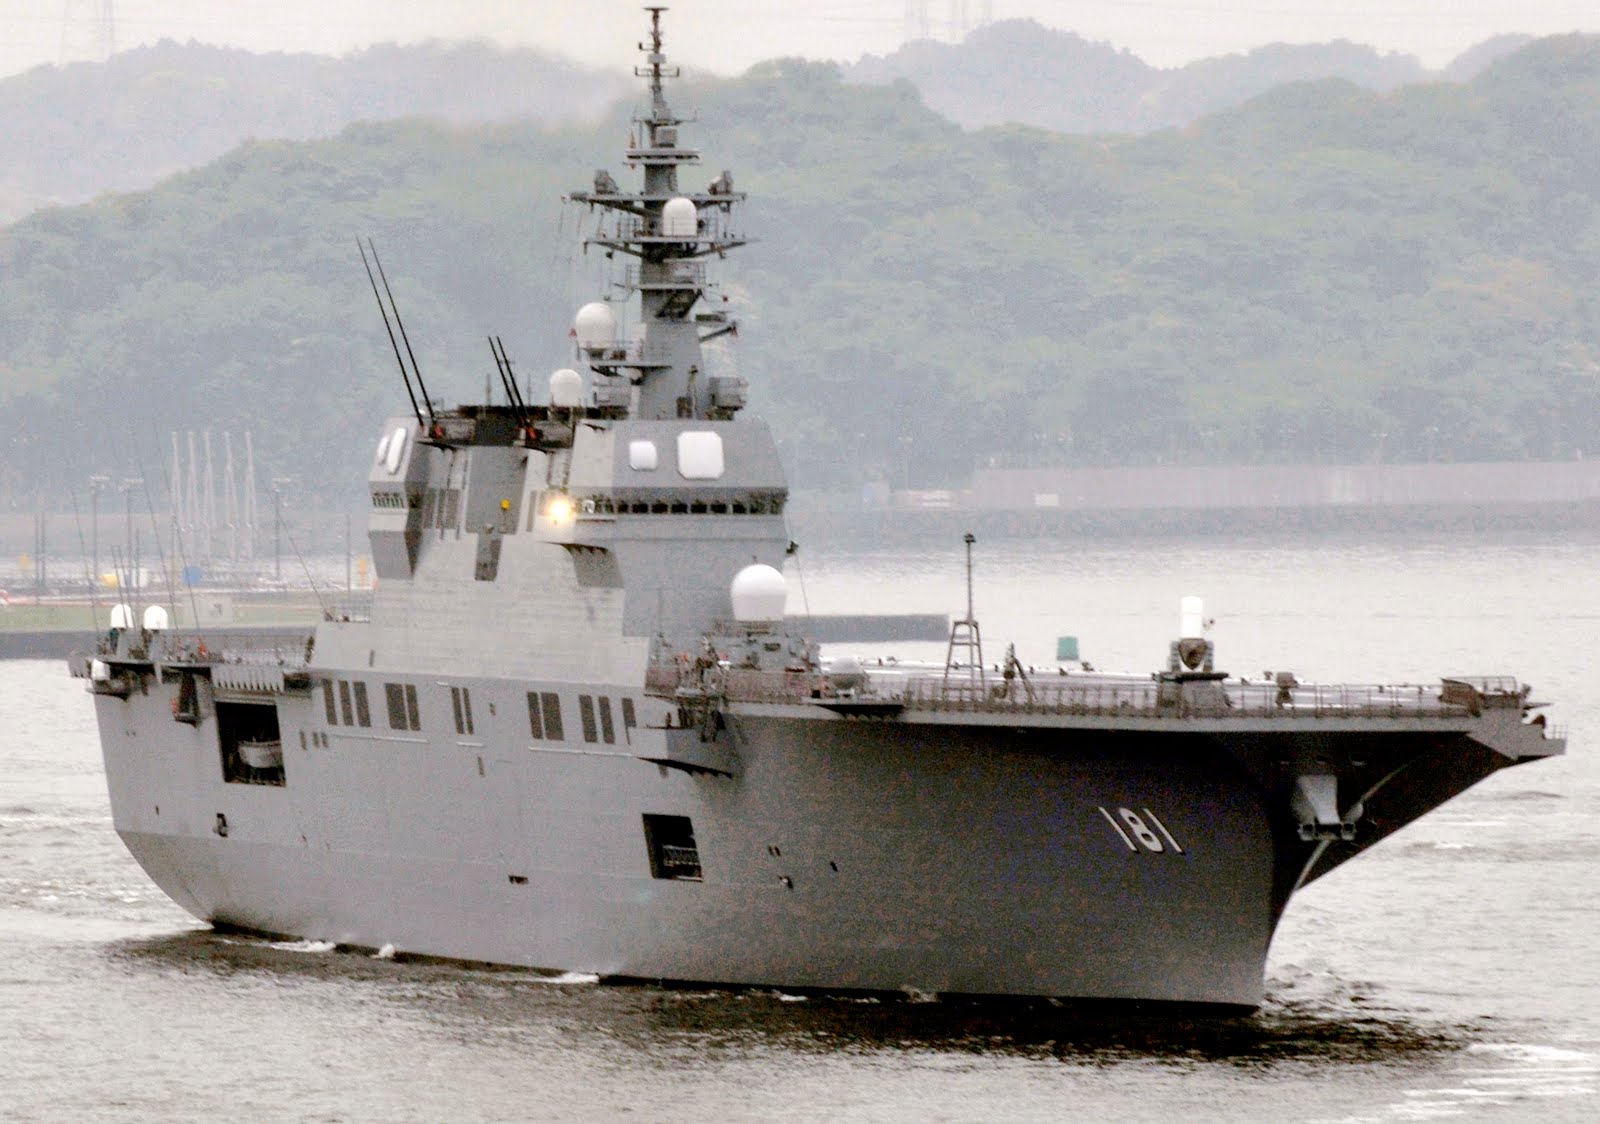 Japanese Helicopter Carrier